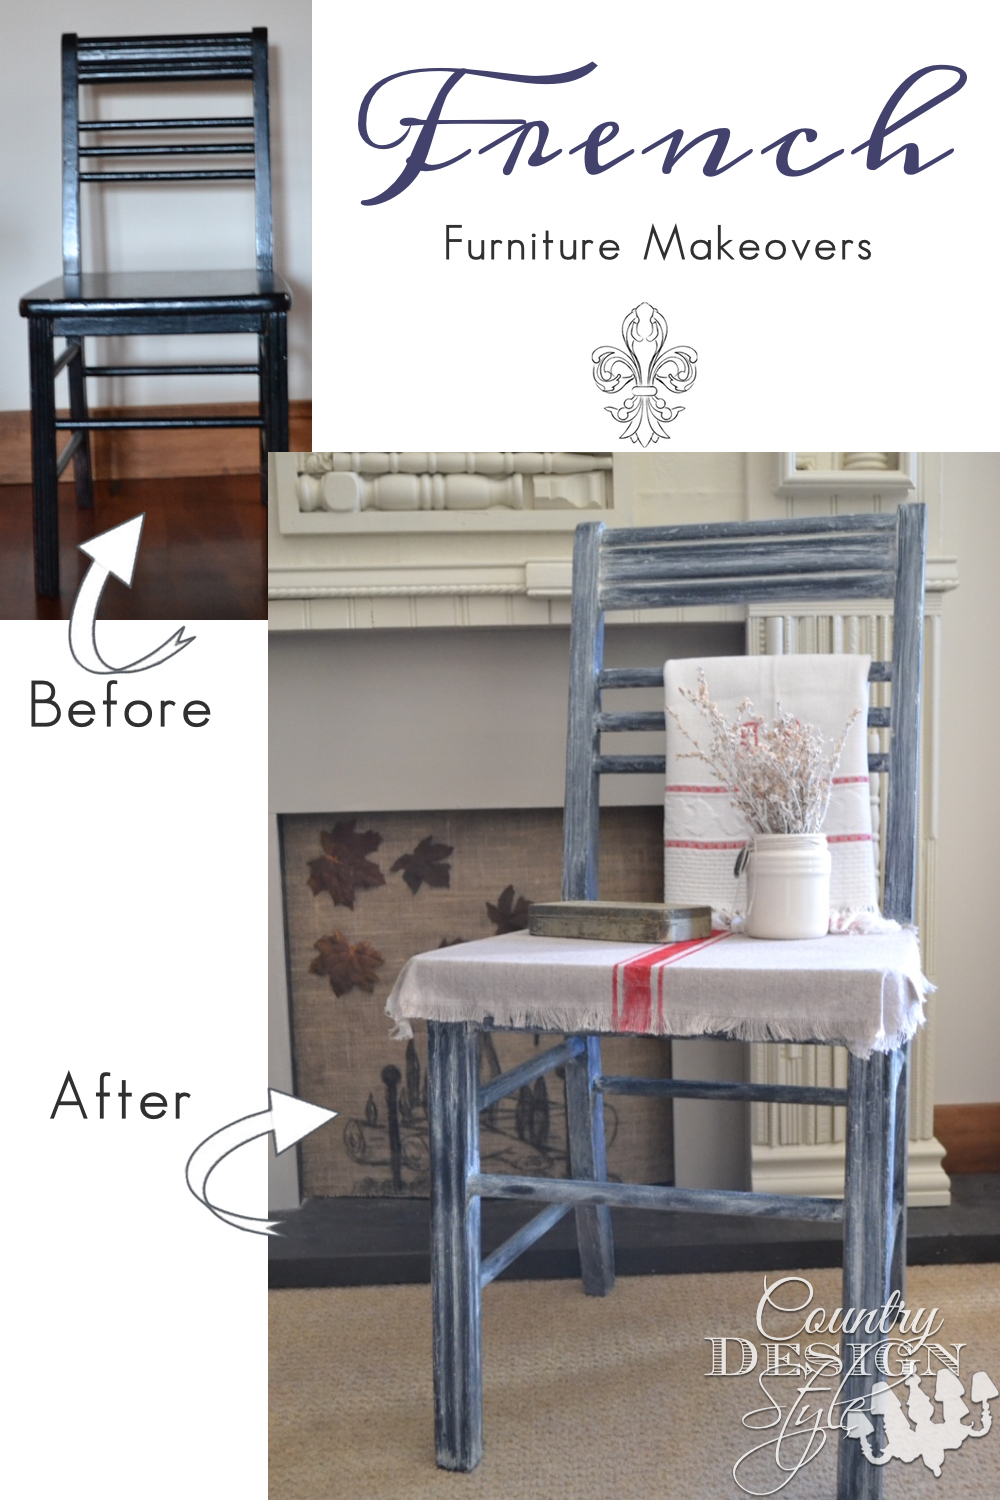 Do you adore French Country Farmhouse style? You will love these furniture makeovers. Country Design Style. www.countrydesignstyle.com